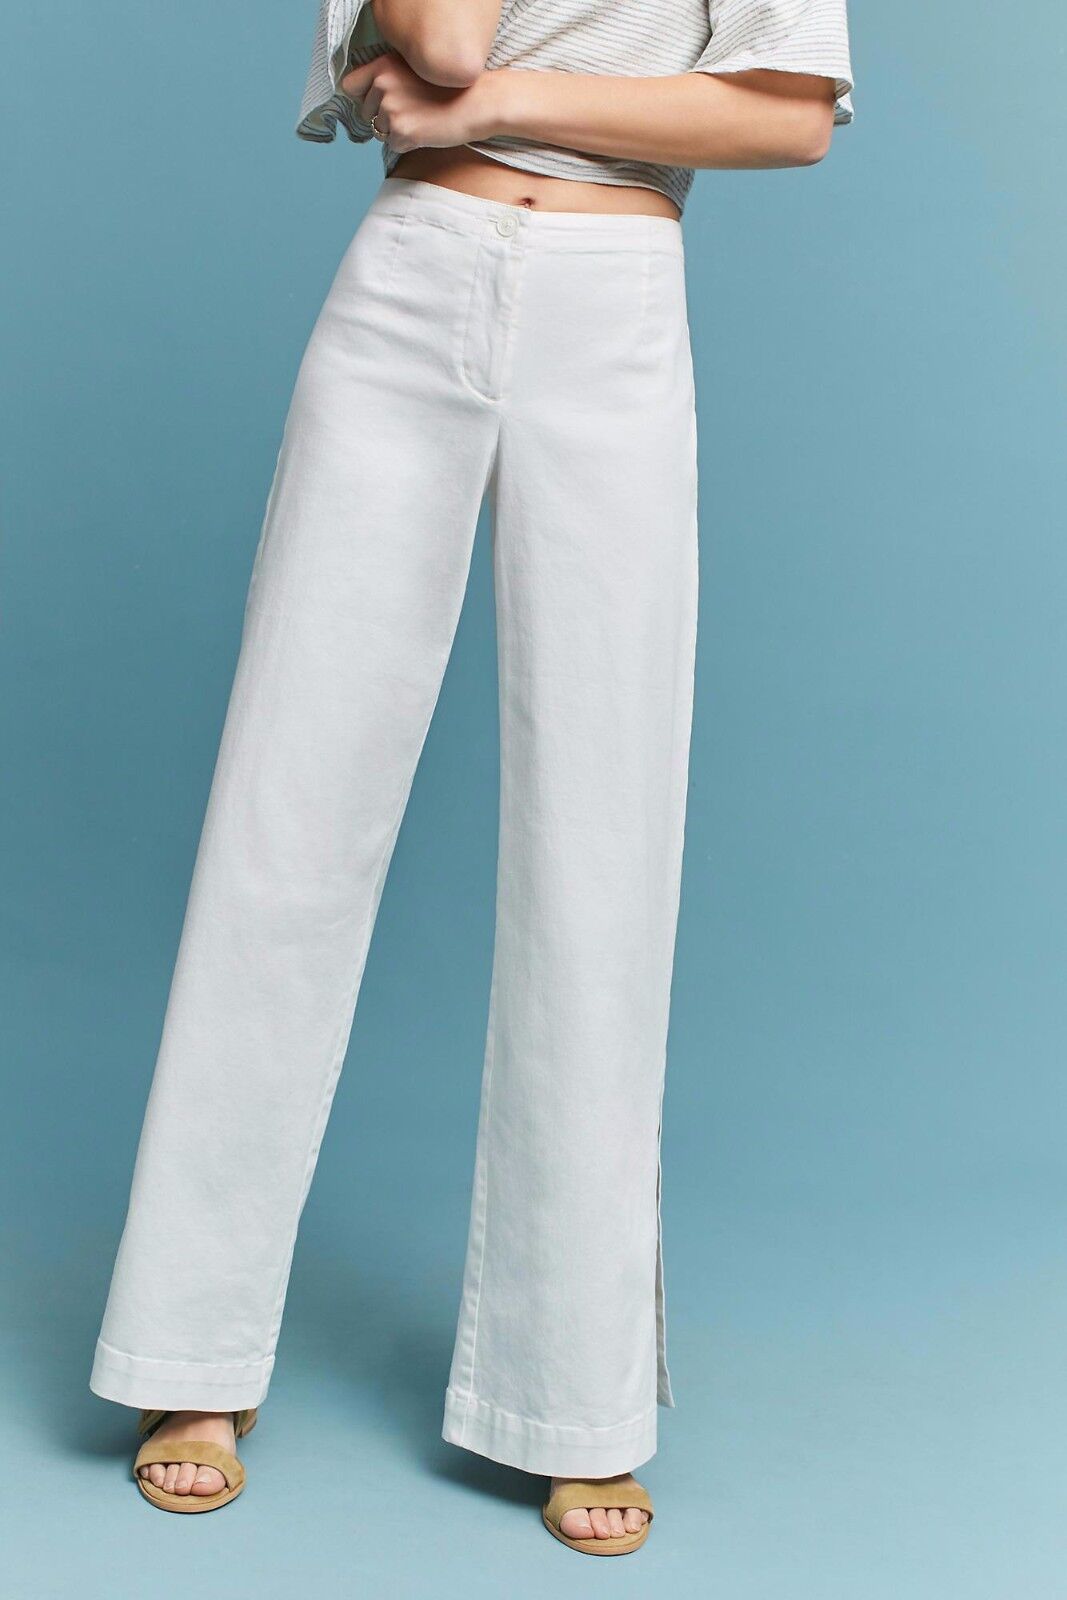 Primary image for NWT PLENTY by TRACY REESE SIDE-SLIT WHITE TROUSER PANTS 4, 6